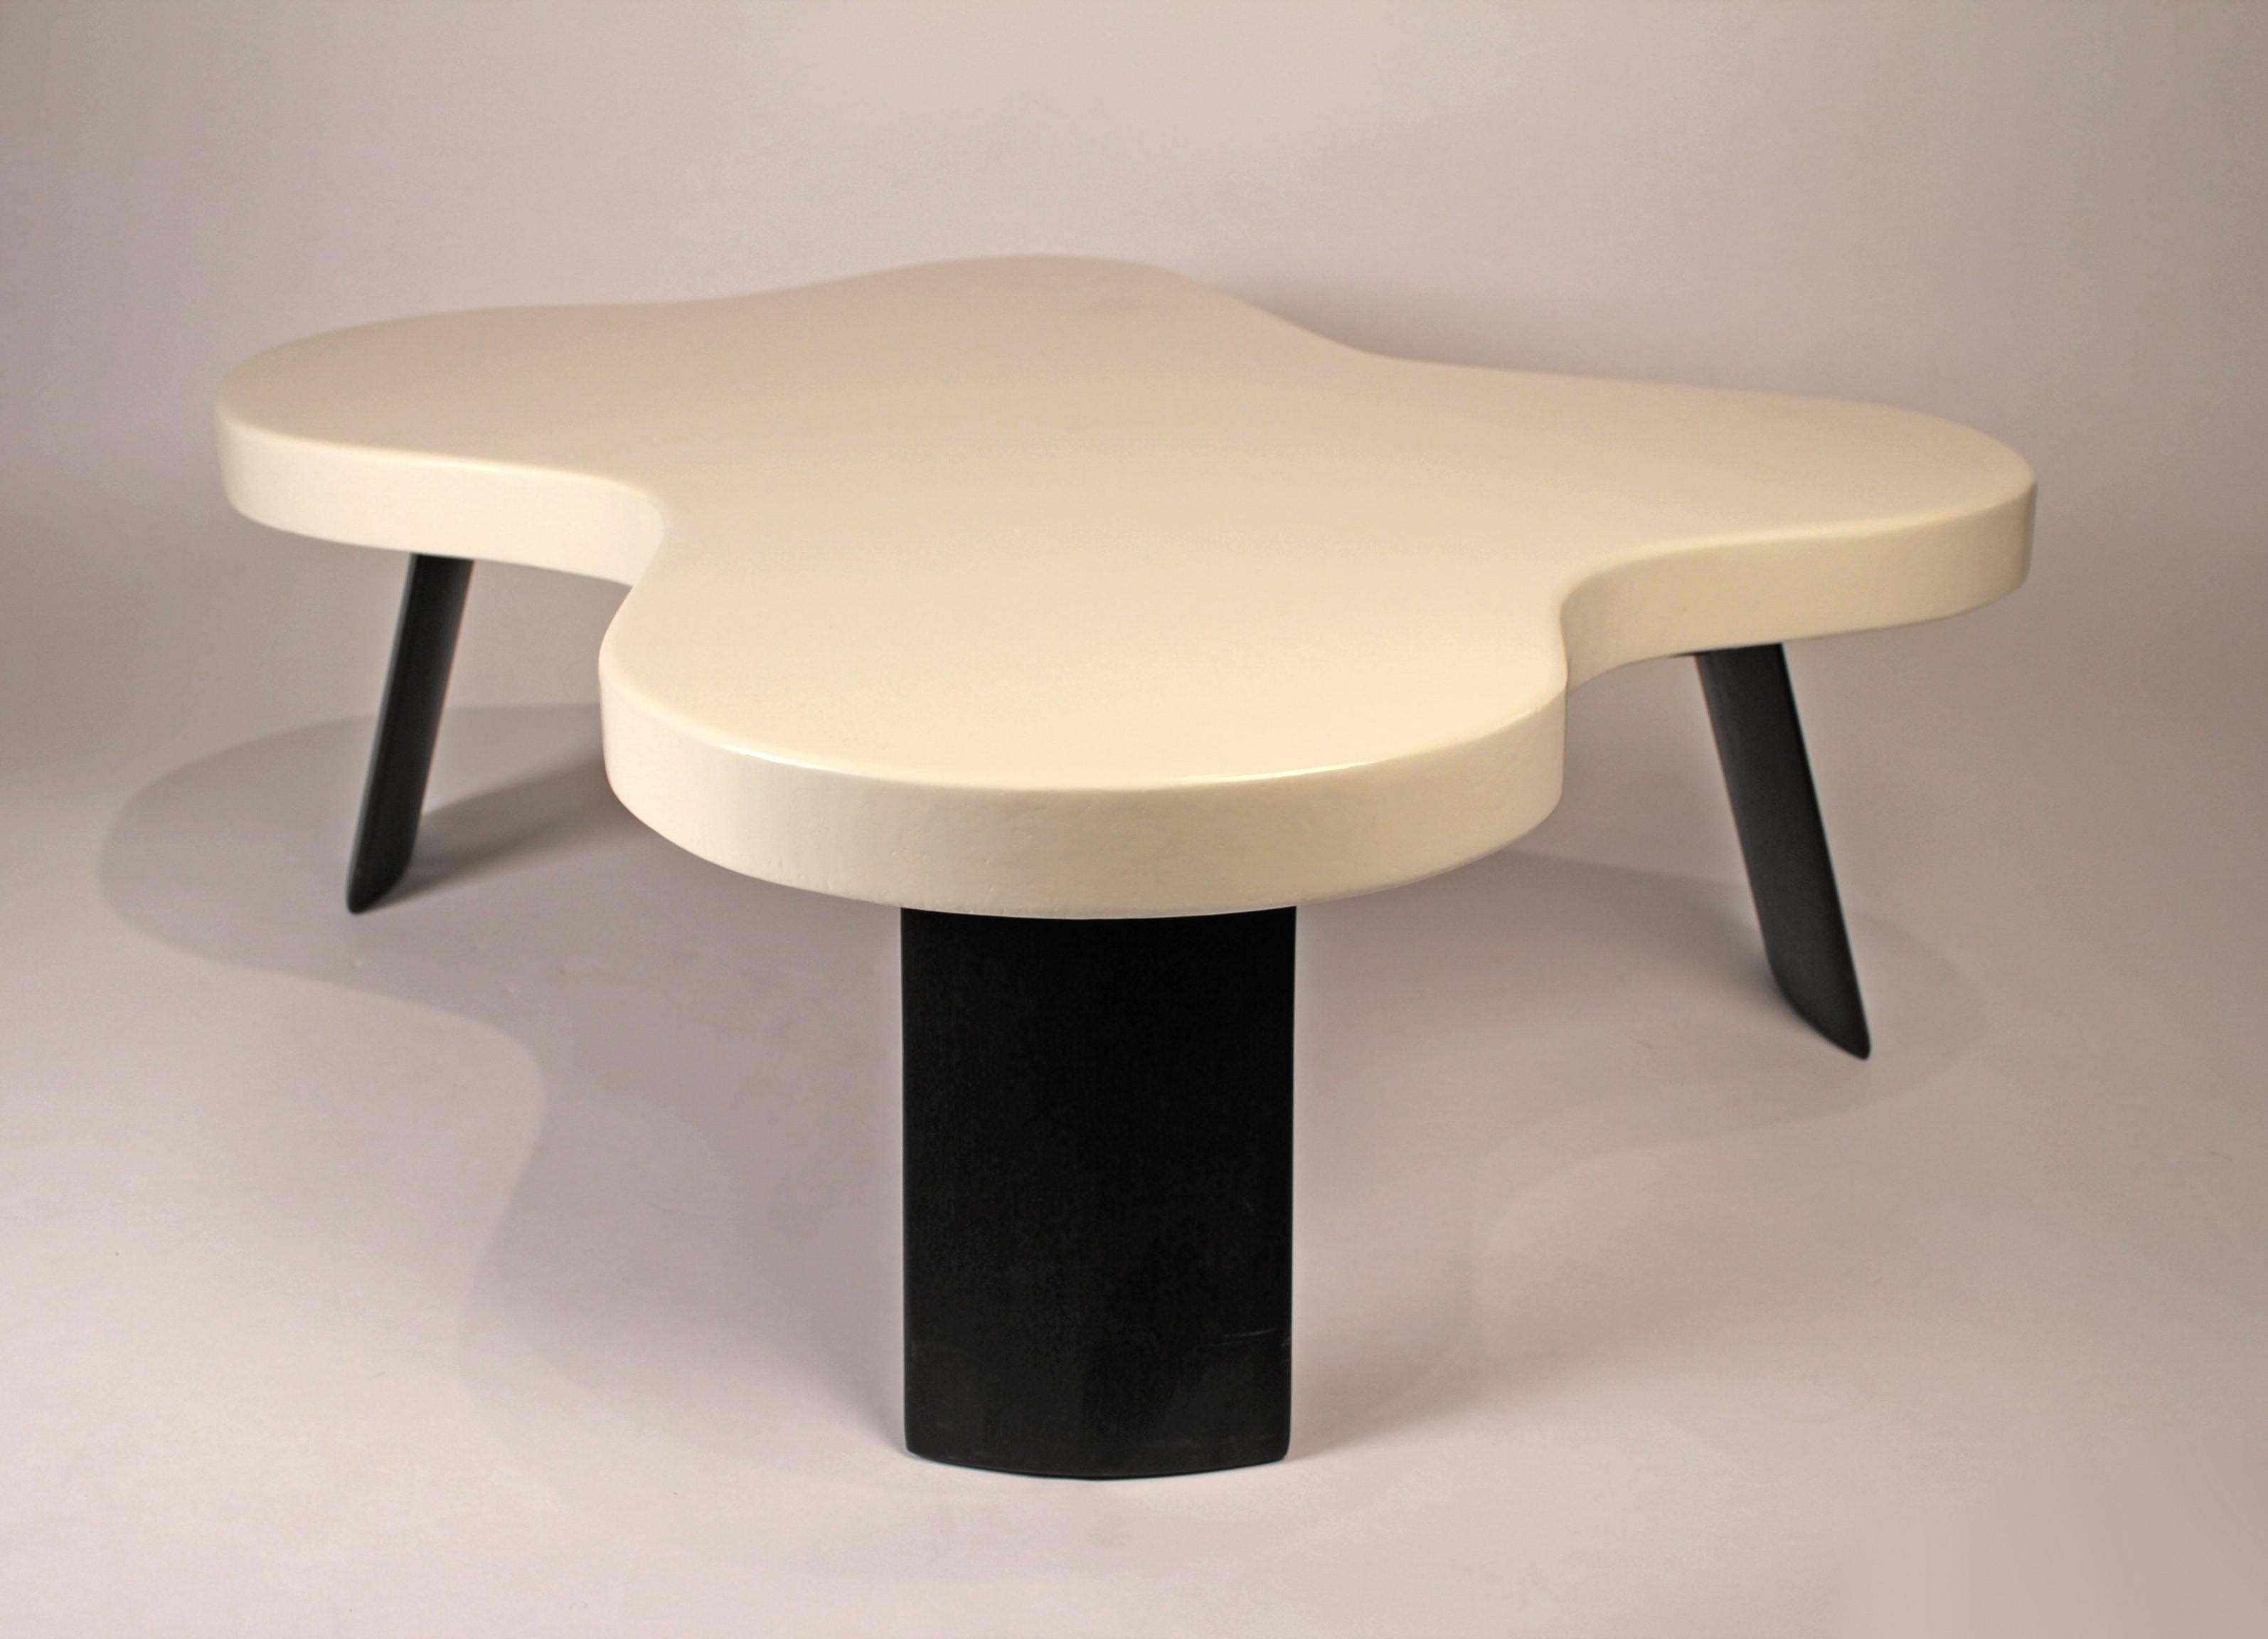 One of Frankl’s most successful and iconic table designs. The Amoeba cocktail table is comprised of a lacquered cork top with stained mahogany legs and was produced by the Johnson Furniture company in the 1950s. Signed to underside with stencilled